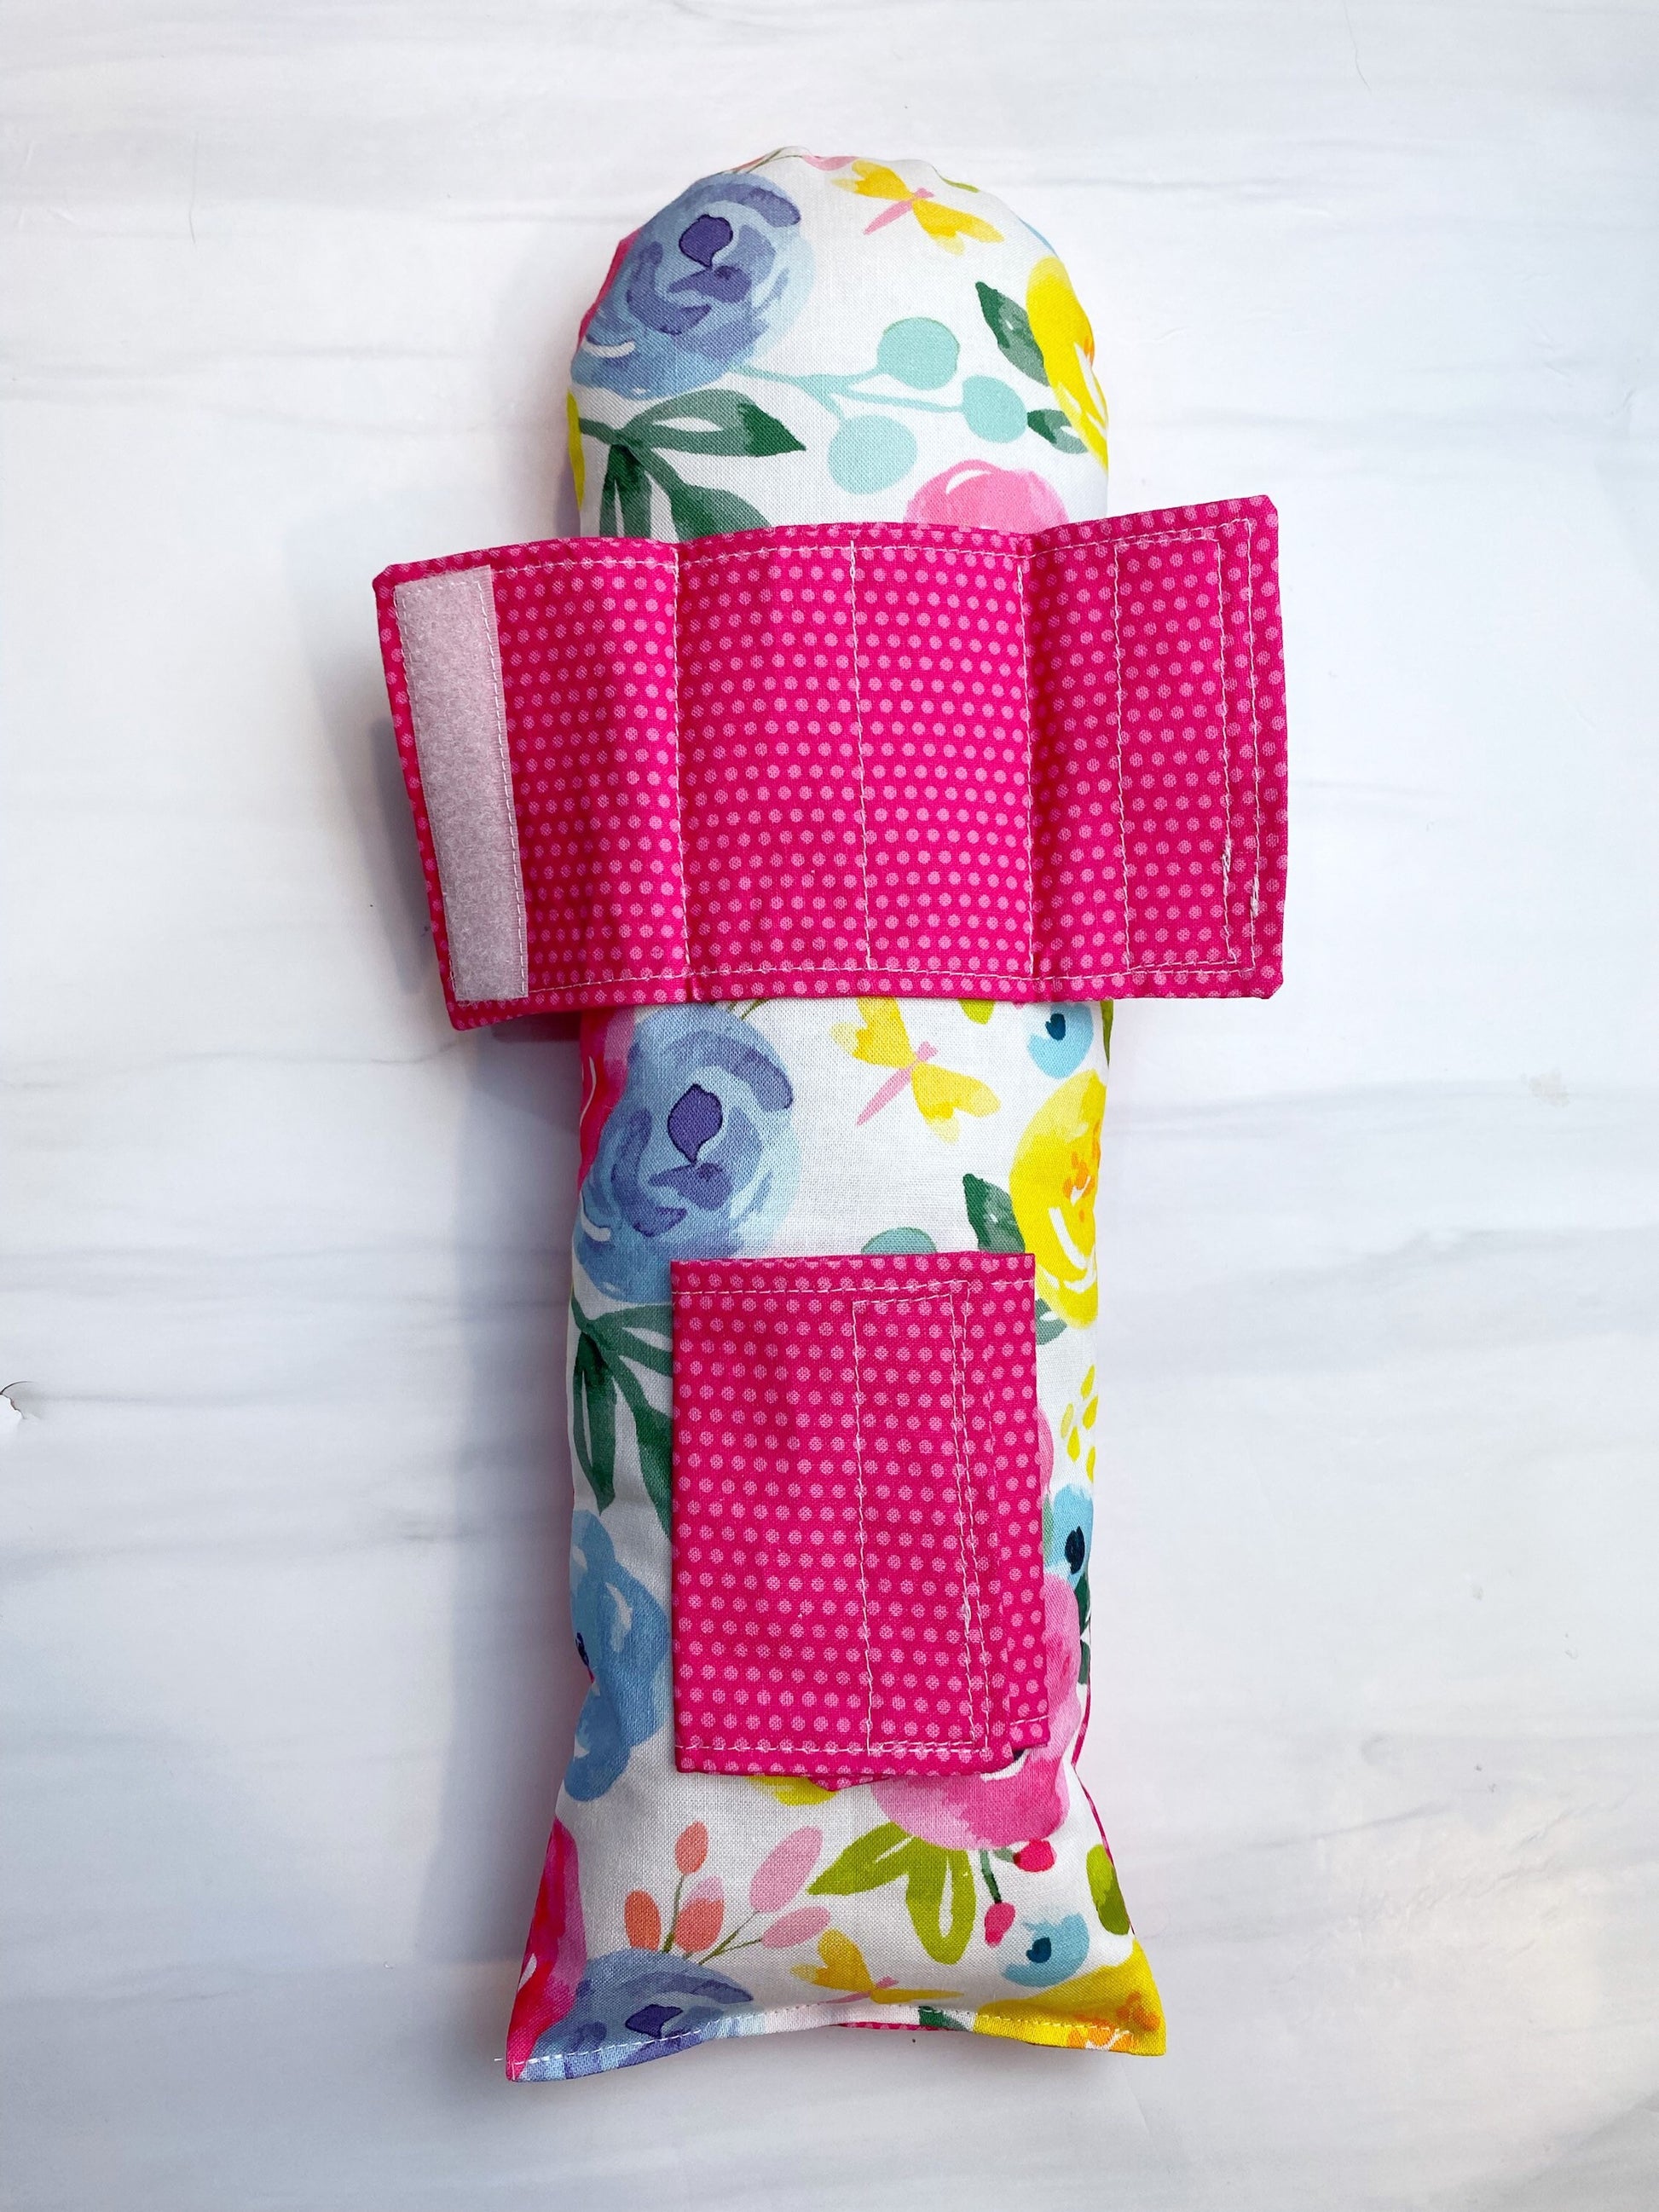 Over The Apple Tree: Seat Belt Pillow